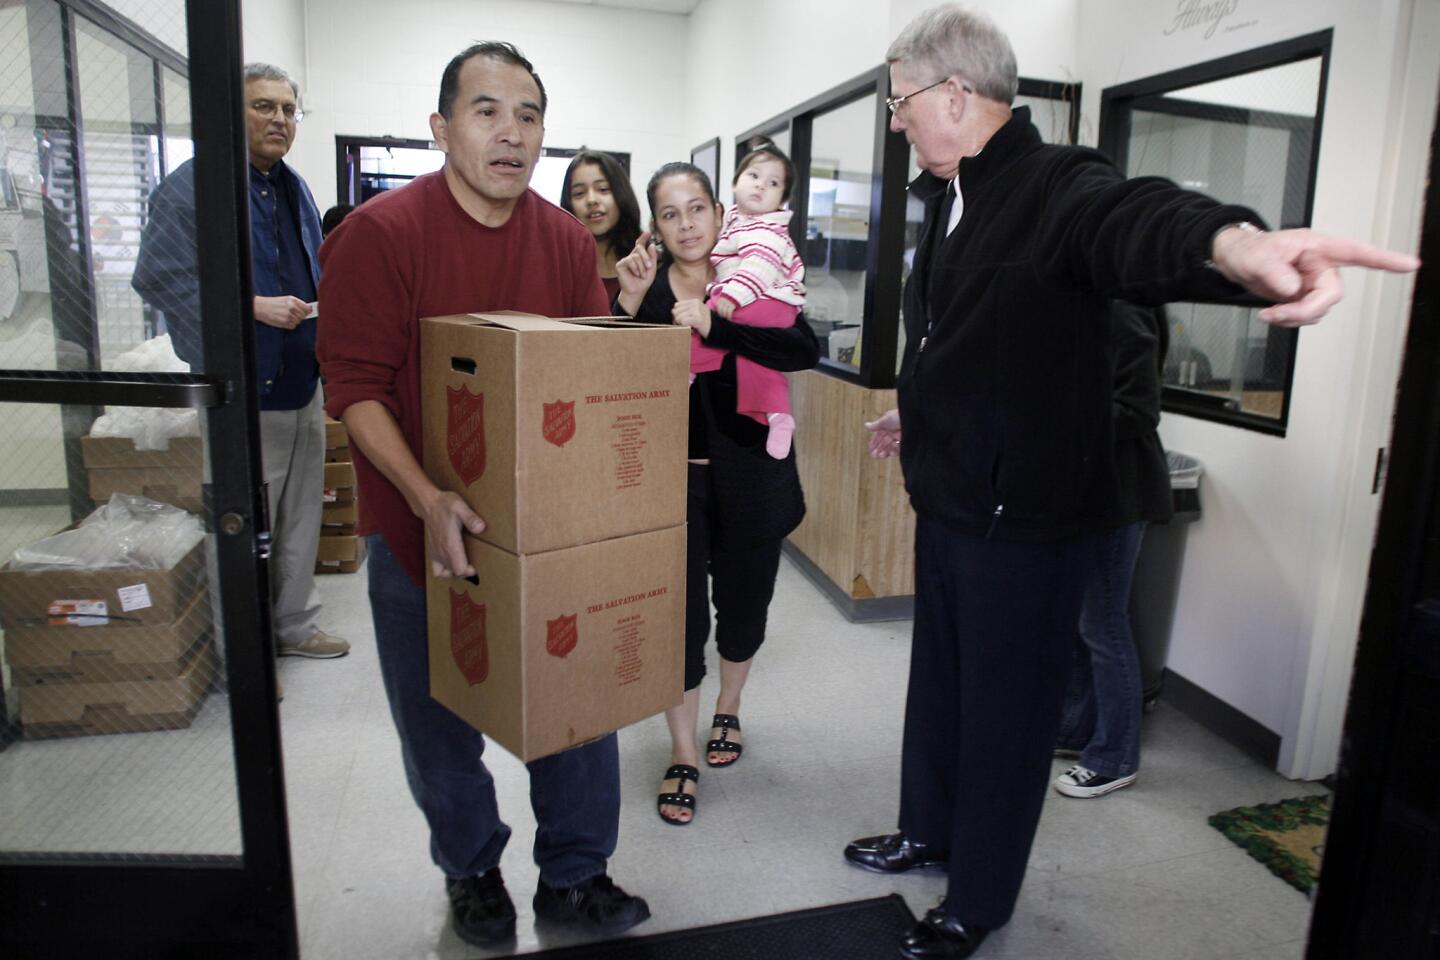 Rafael Fernandez, from second left, carries boxes of food for Jane, 12, Lucy and Roselyn Vasquez while Major Bob Rudd directs them to go outside during a Christmas distribution that took place at the Salvation Army in Burbank on Thursday, December 15, 2011. The Salvation Army is expecting over 1200 people during the distribution.